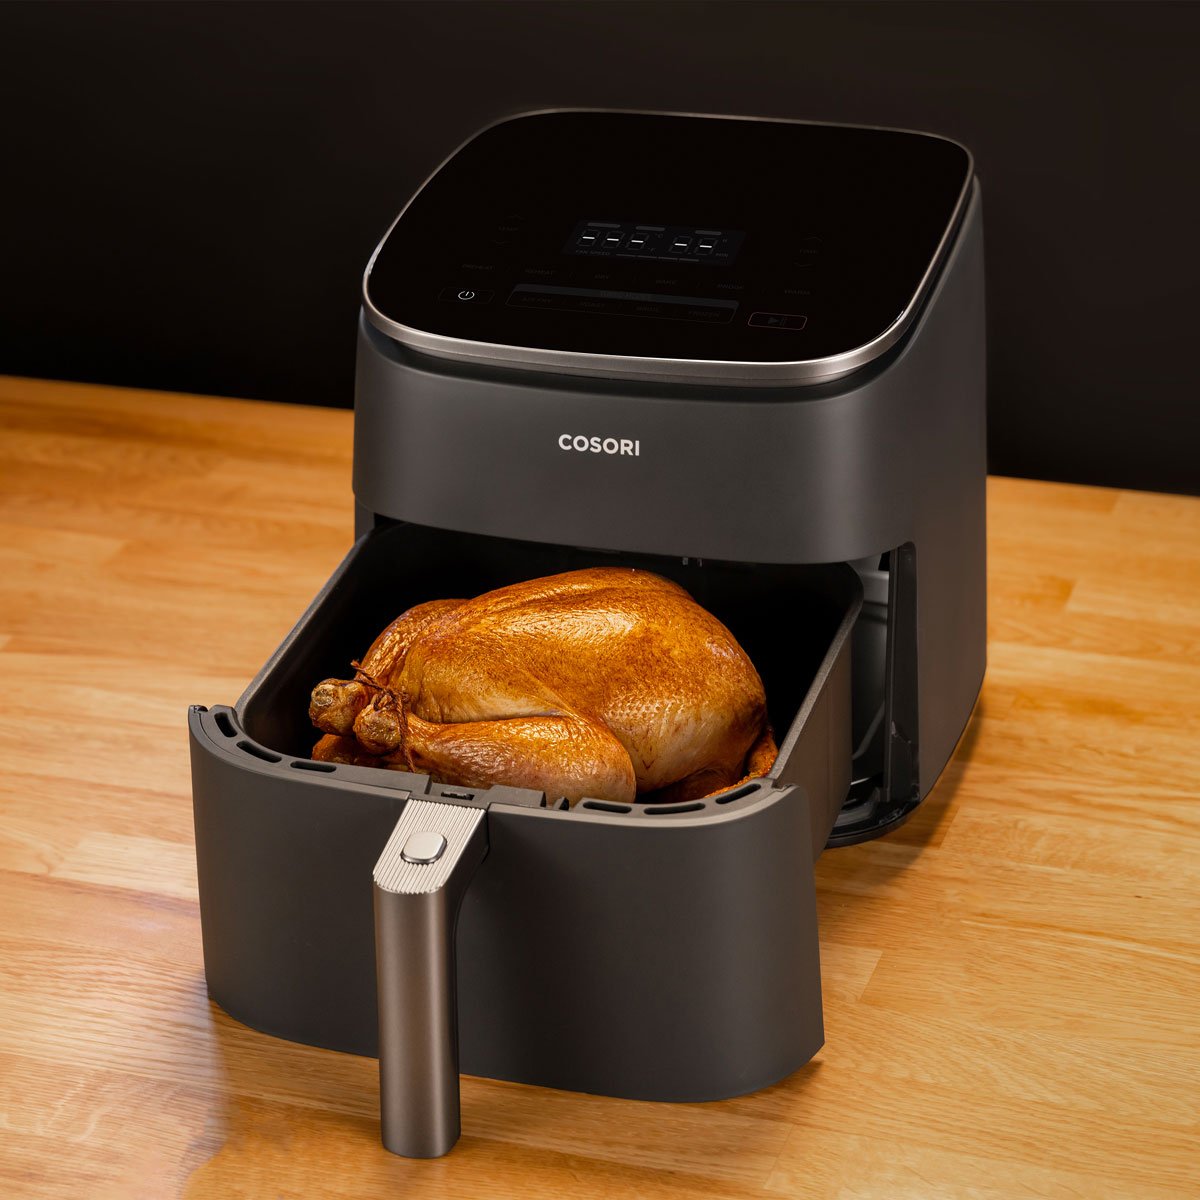 The ✨ COSORI TurboBlaze™ 6.0-Quart Air Fryer✨ is sleek in design without  compromising the capacity.